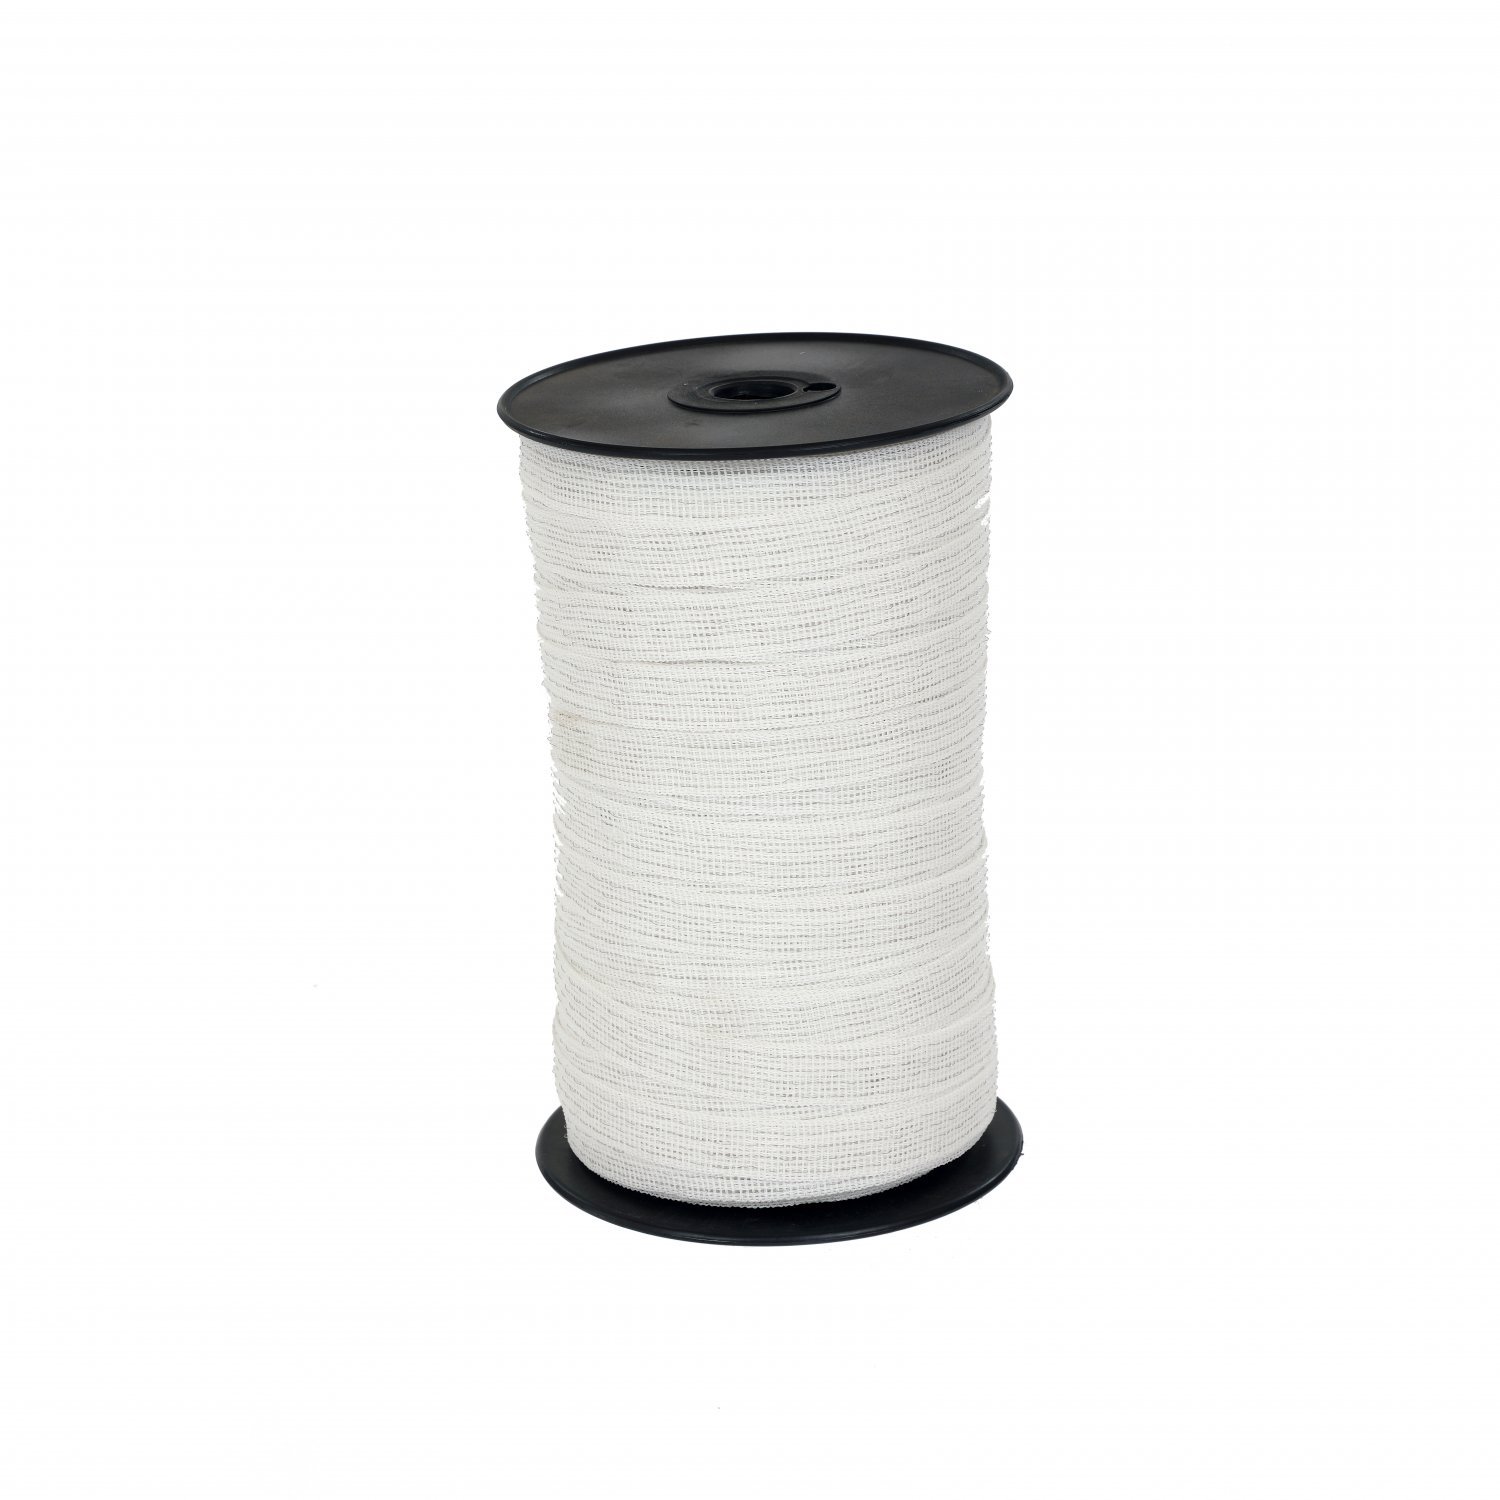 1 ROLL Electric fencing tape 20mm x 200m white tape 